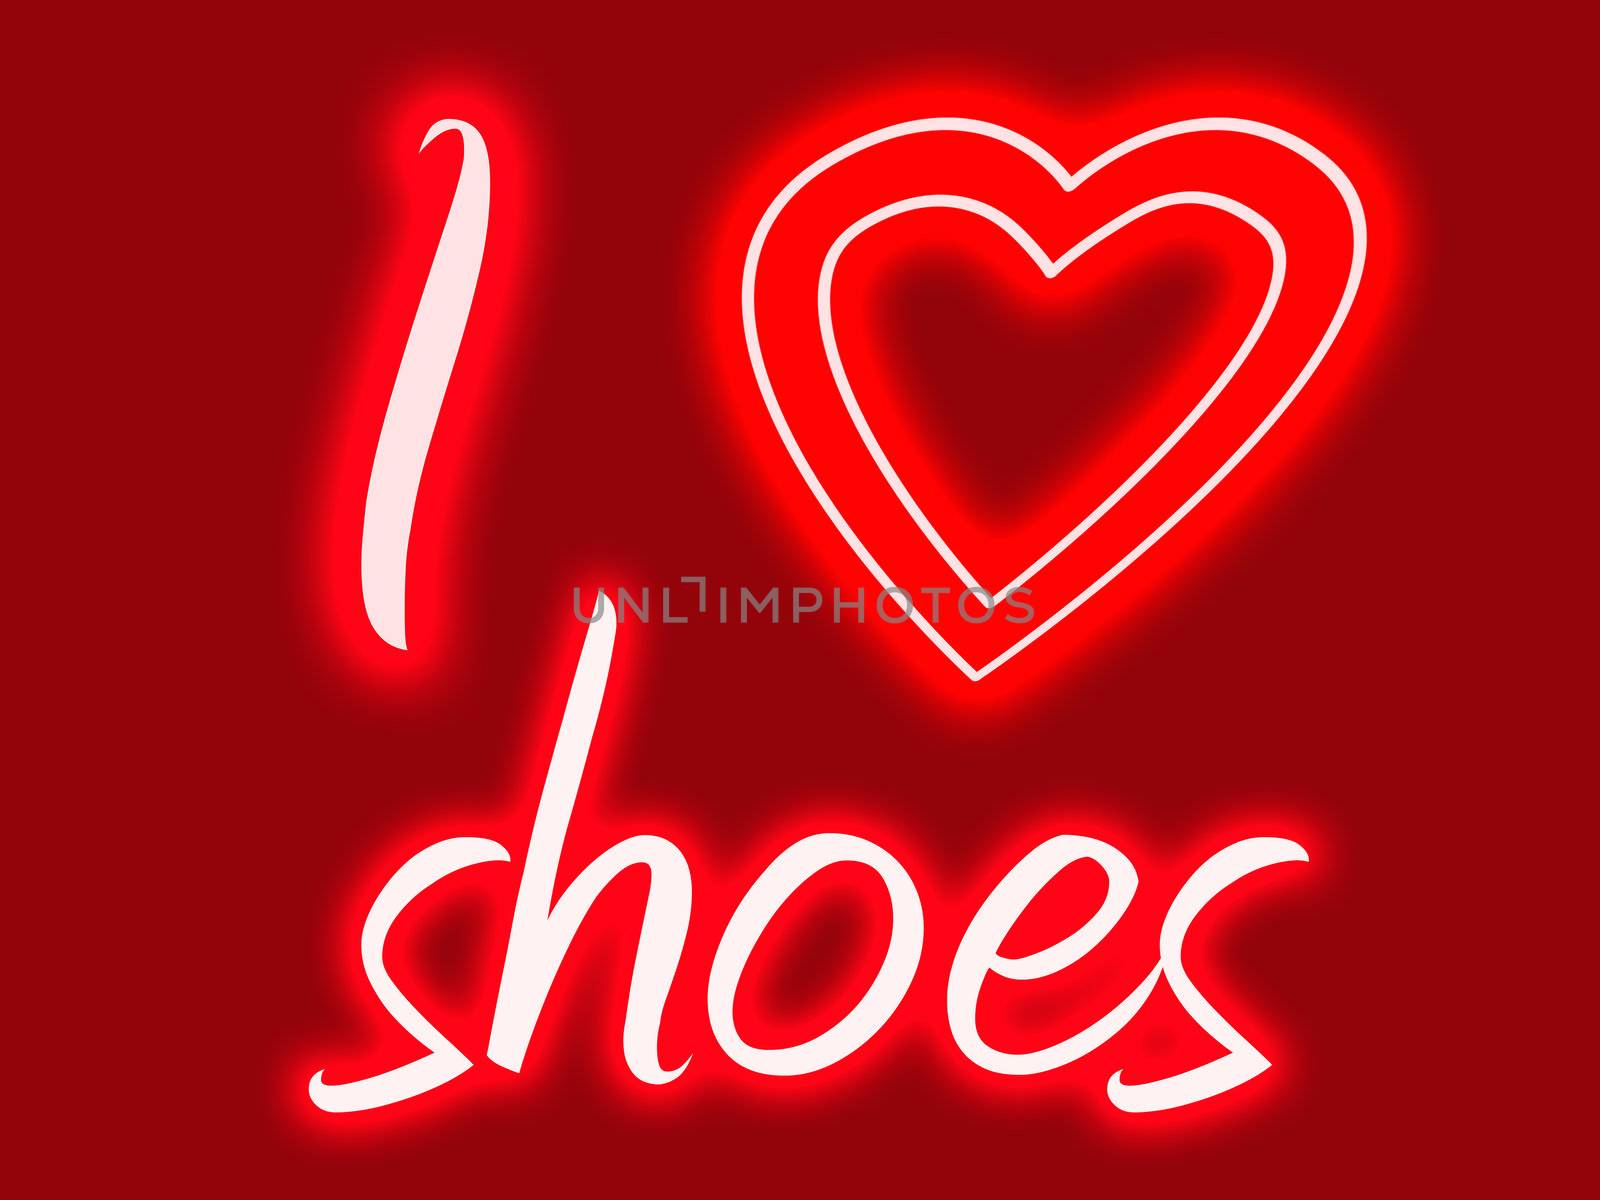 I heart shoes by tommroch